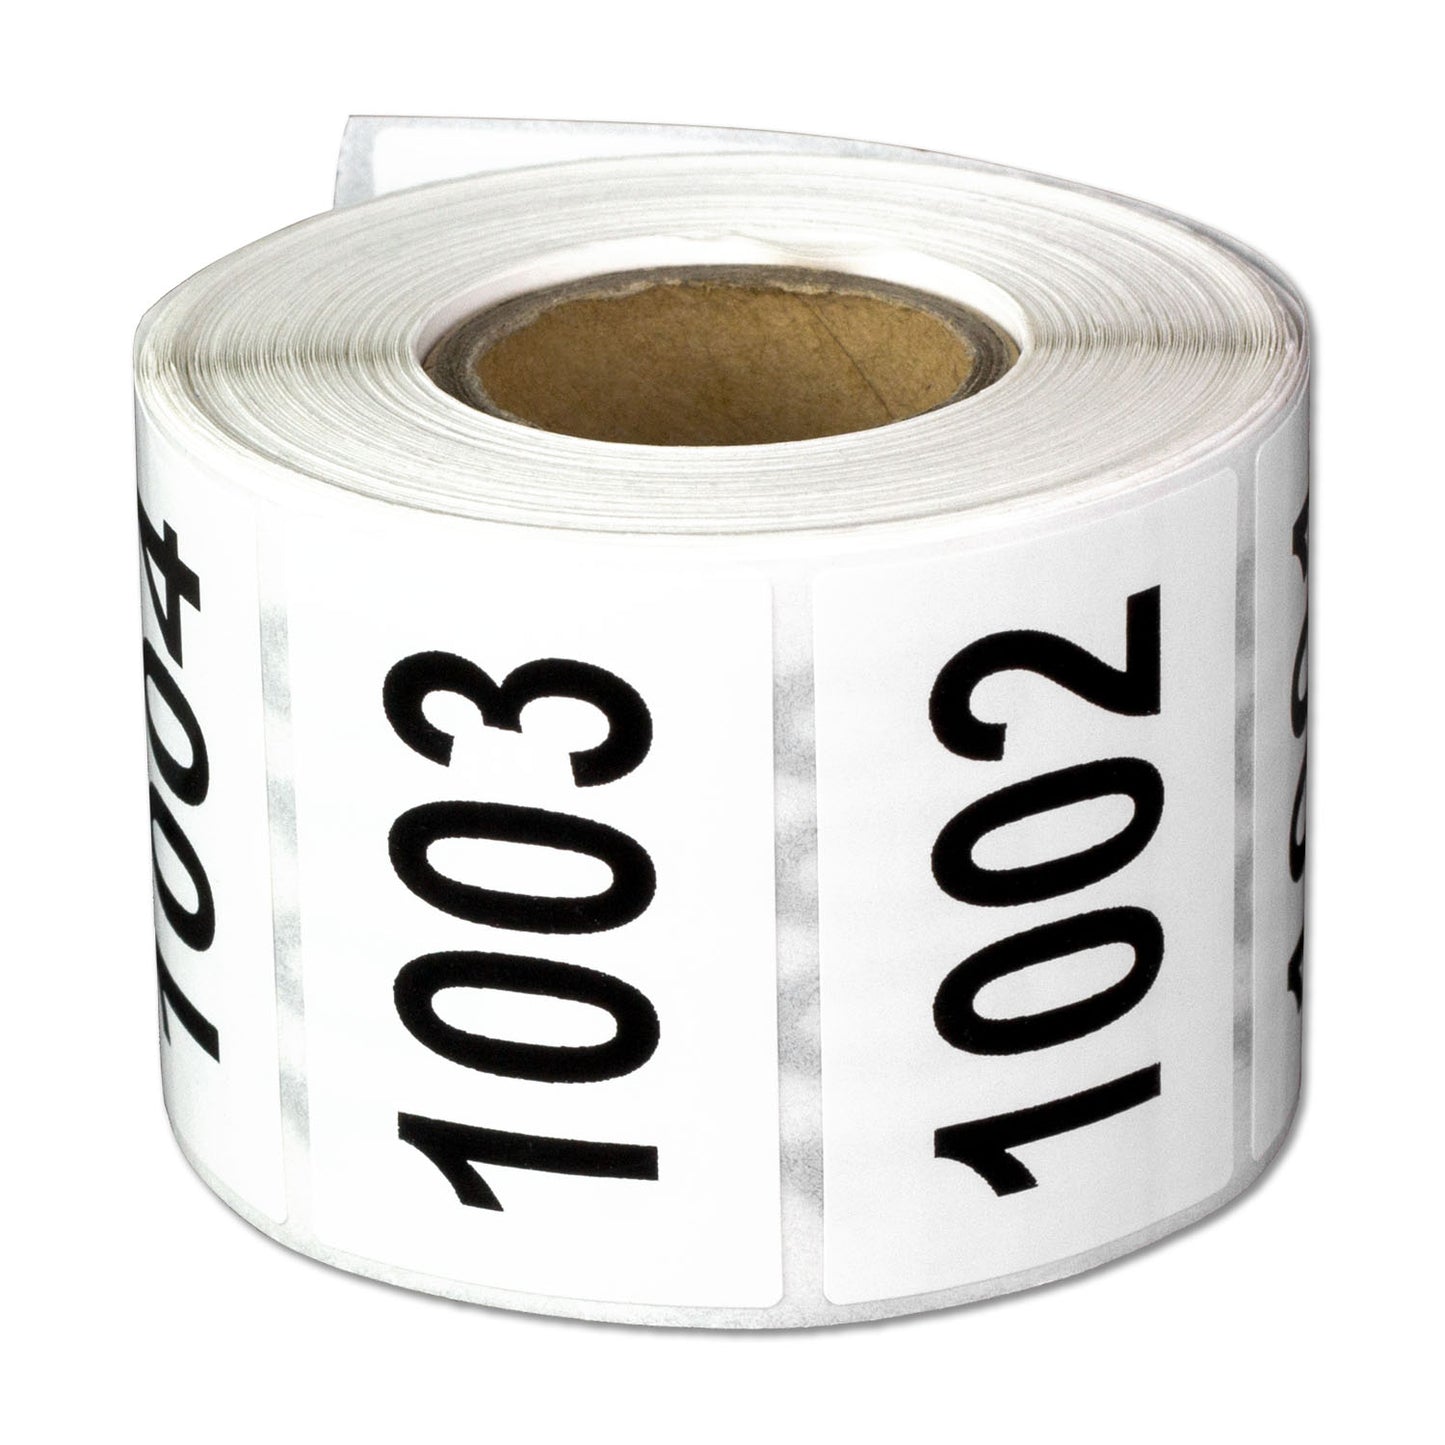 1.5 x 1 inch | Consecutive Numbers "1001 to 1500" Stickers